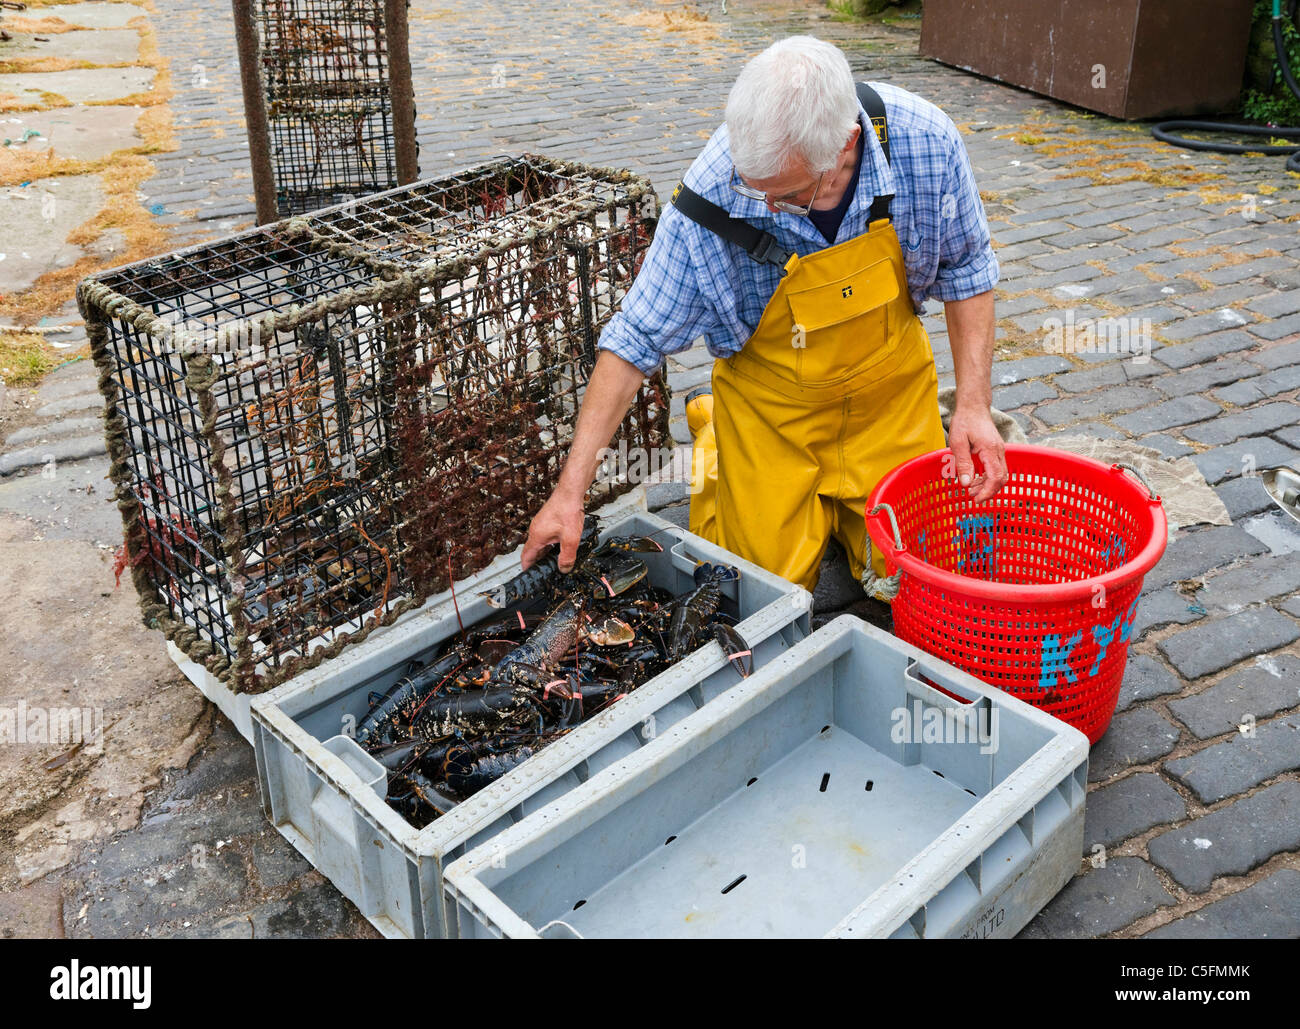 Fisherman removing fresh lobster from pots on the quayside in the fishing village of Crail, East Neuk, Fife, Scotland, UK Stock Photo